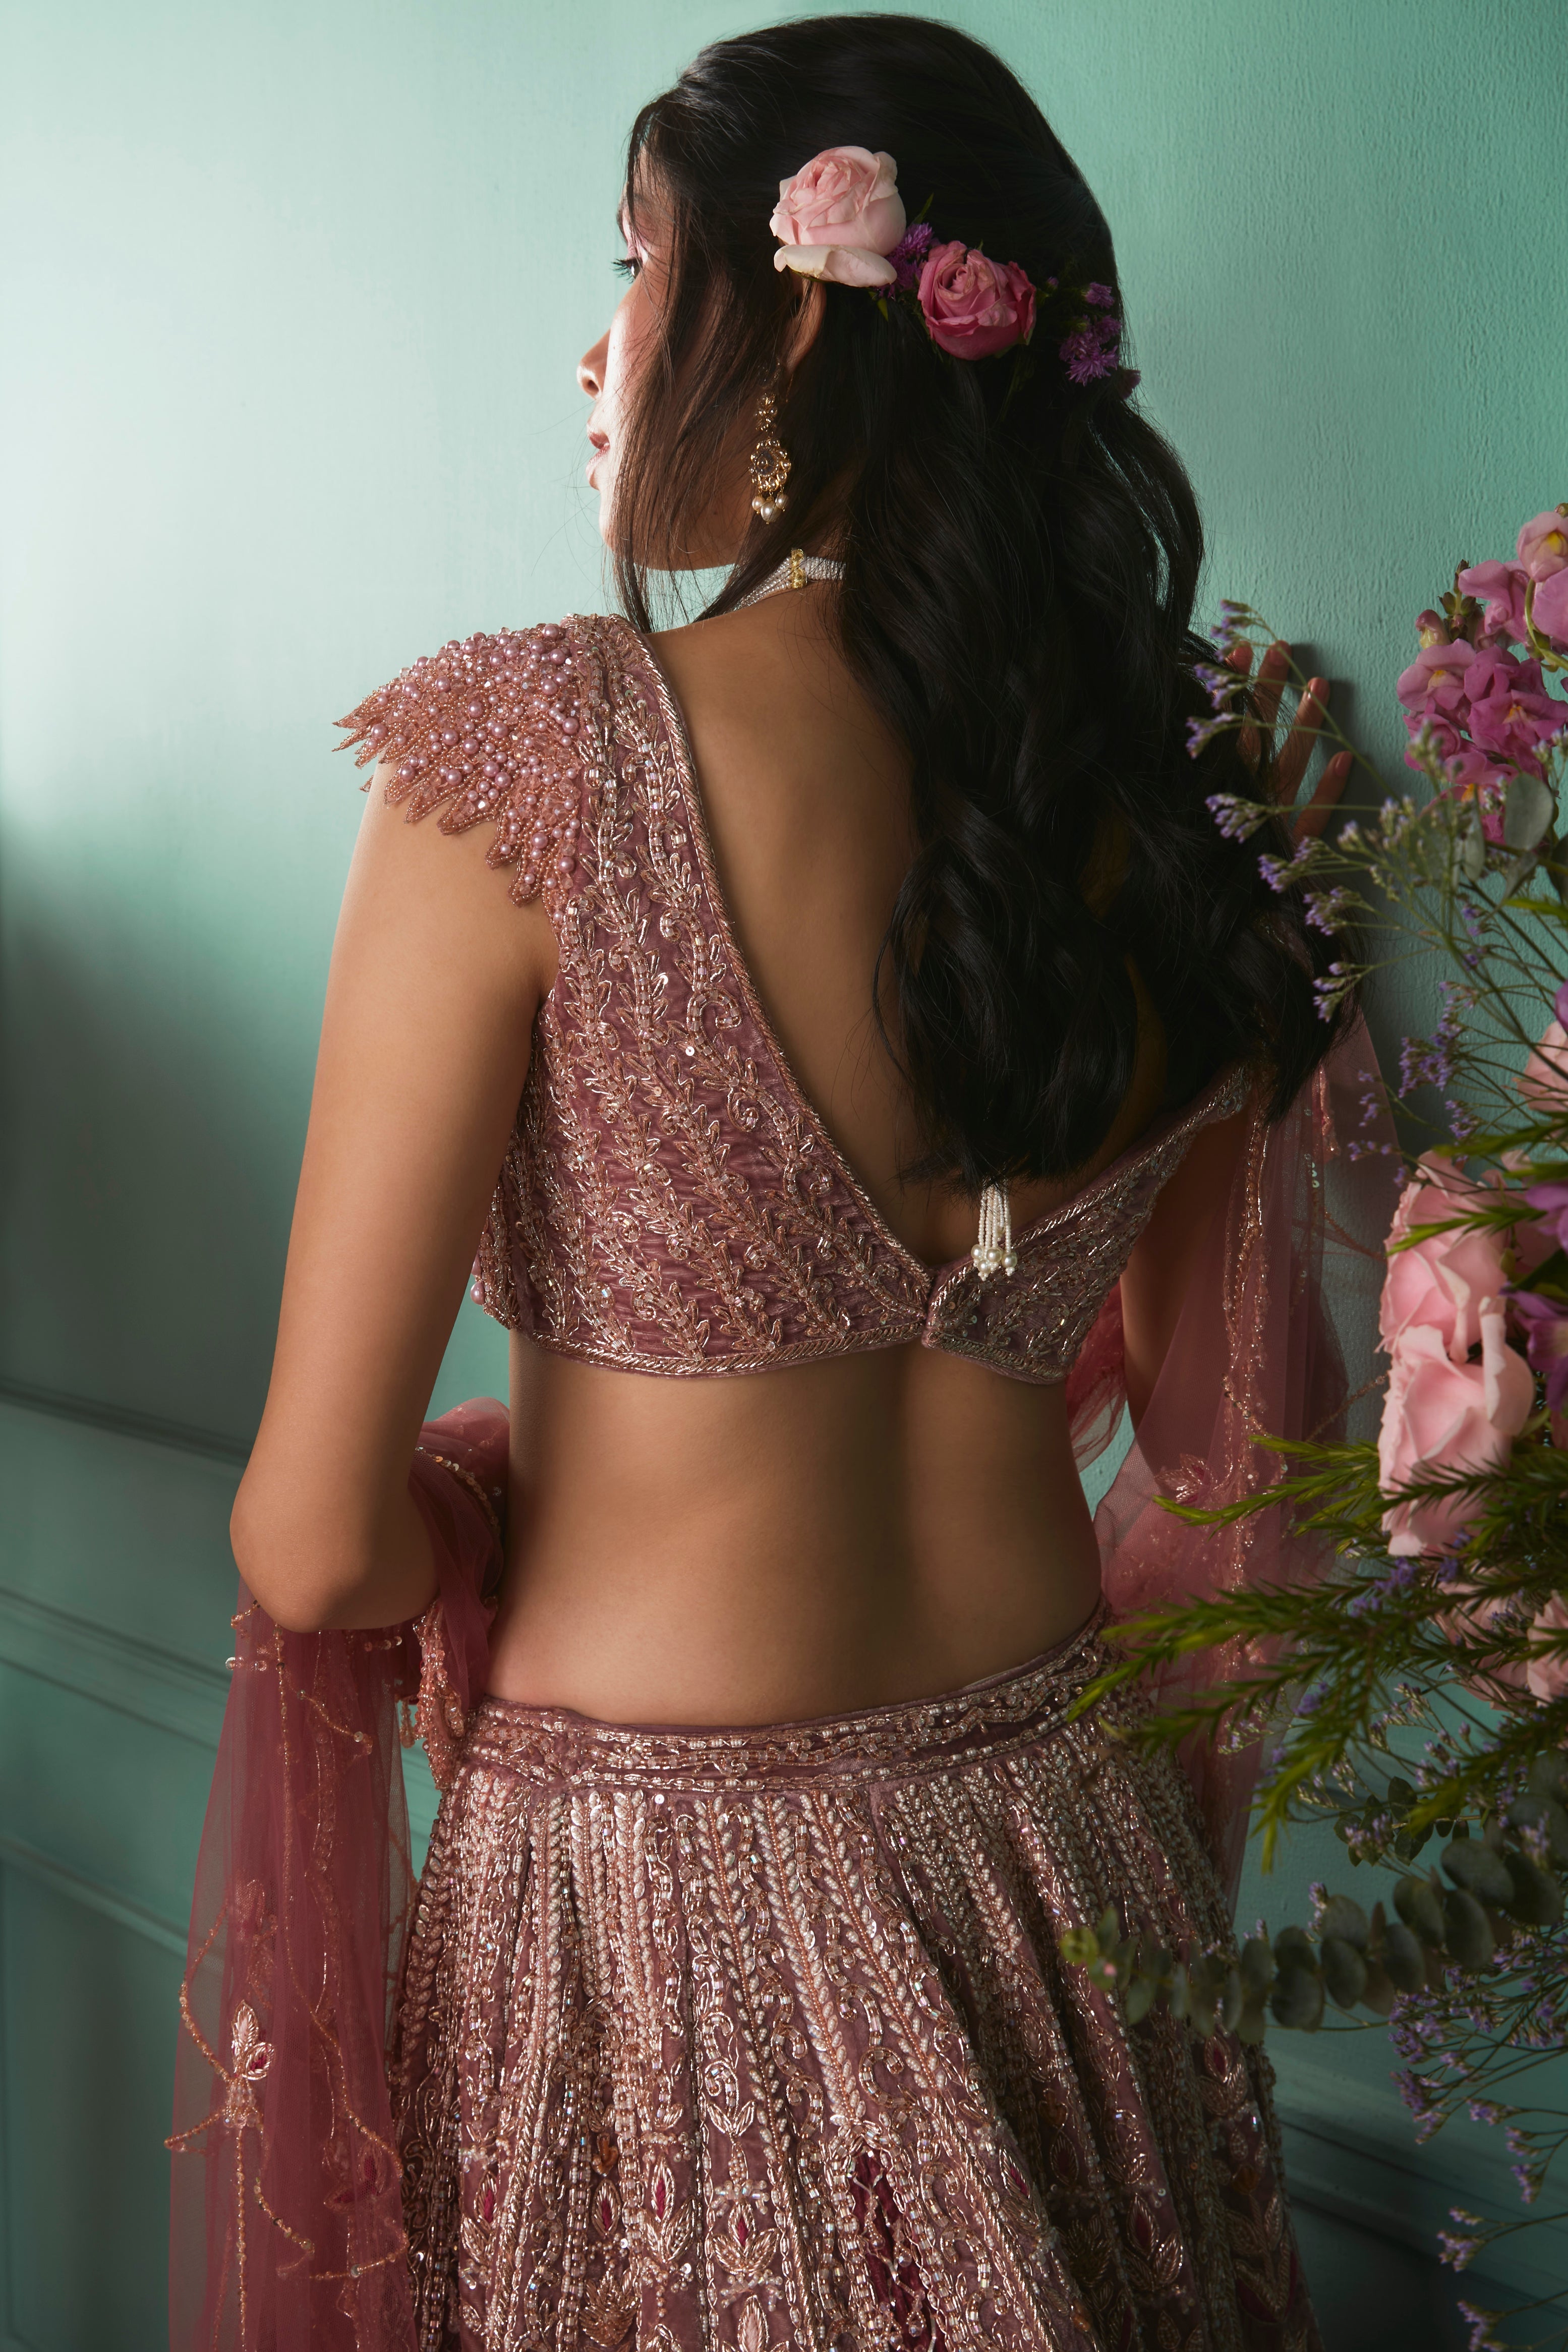 Rust/Rose Lehenga With French Chateau Elements